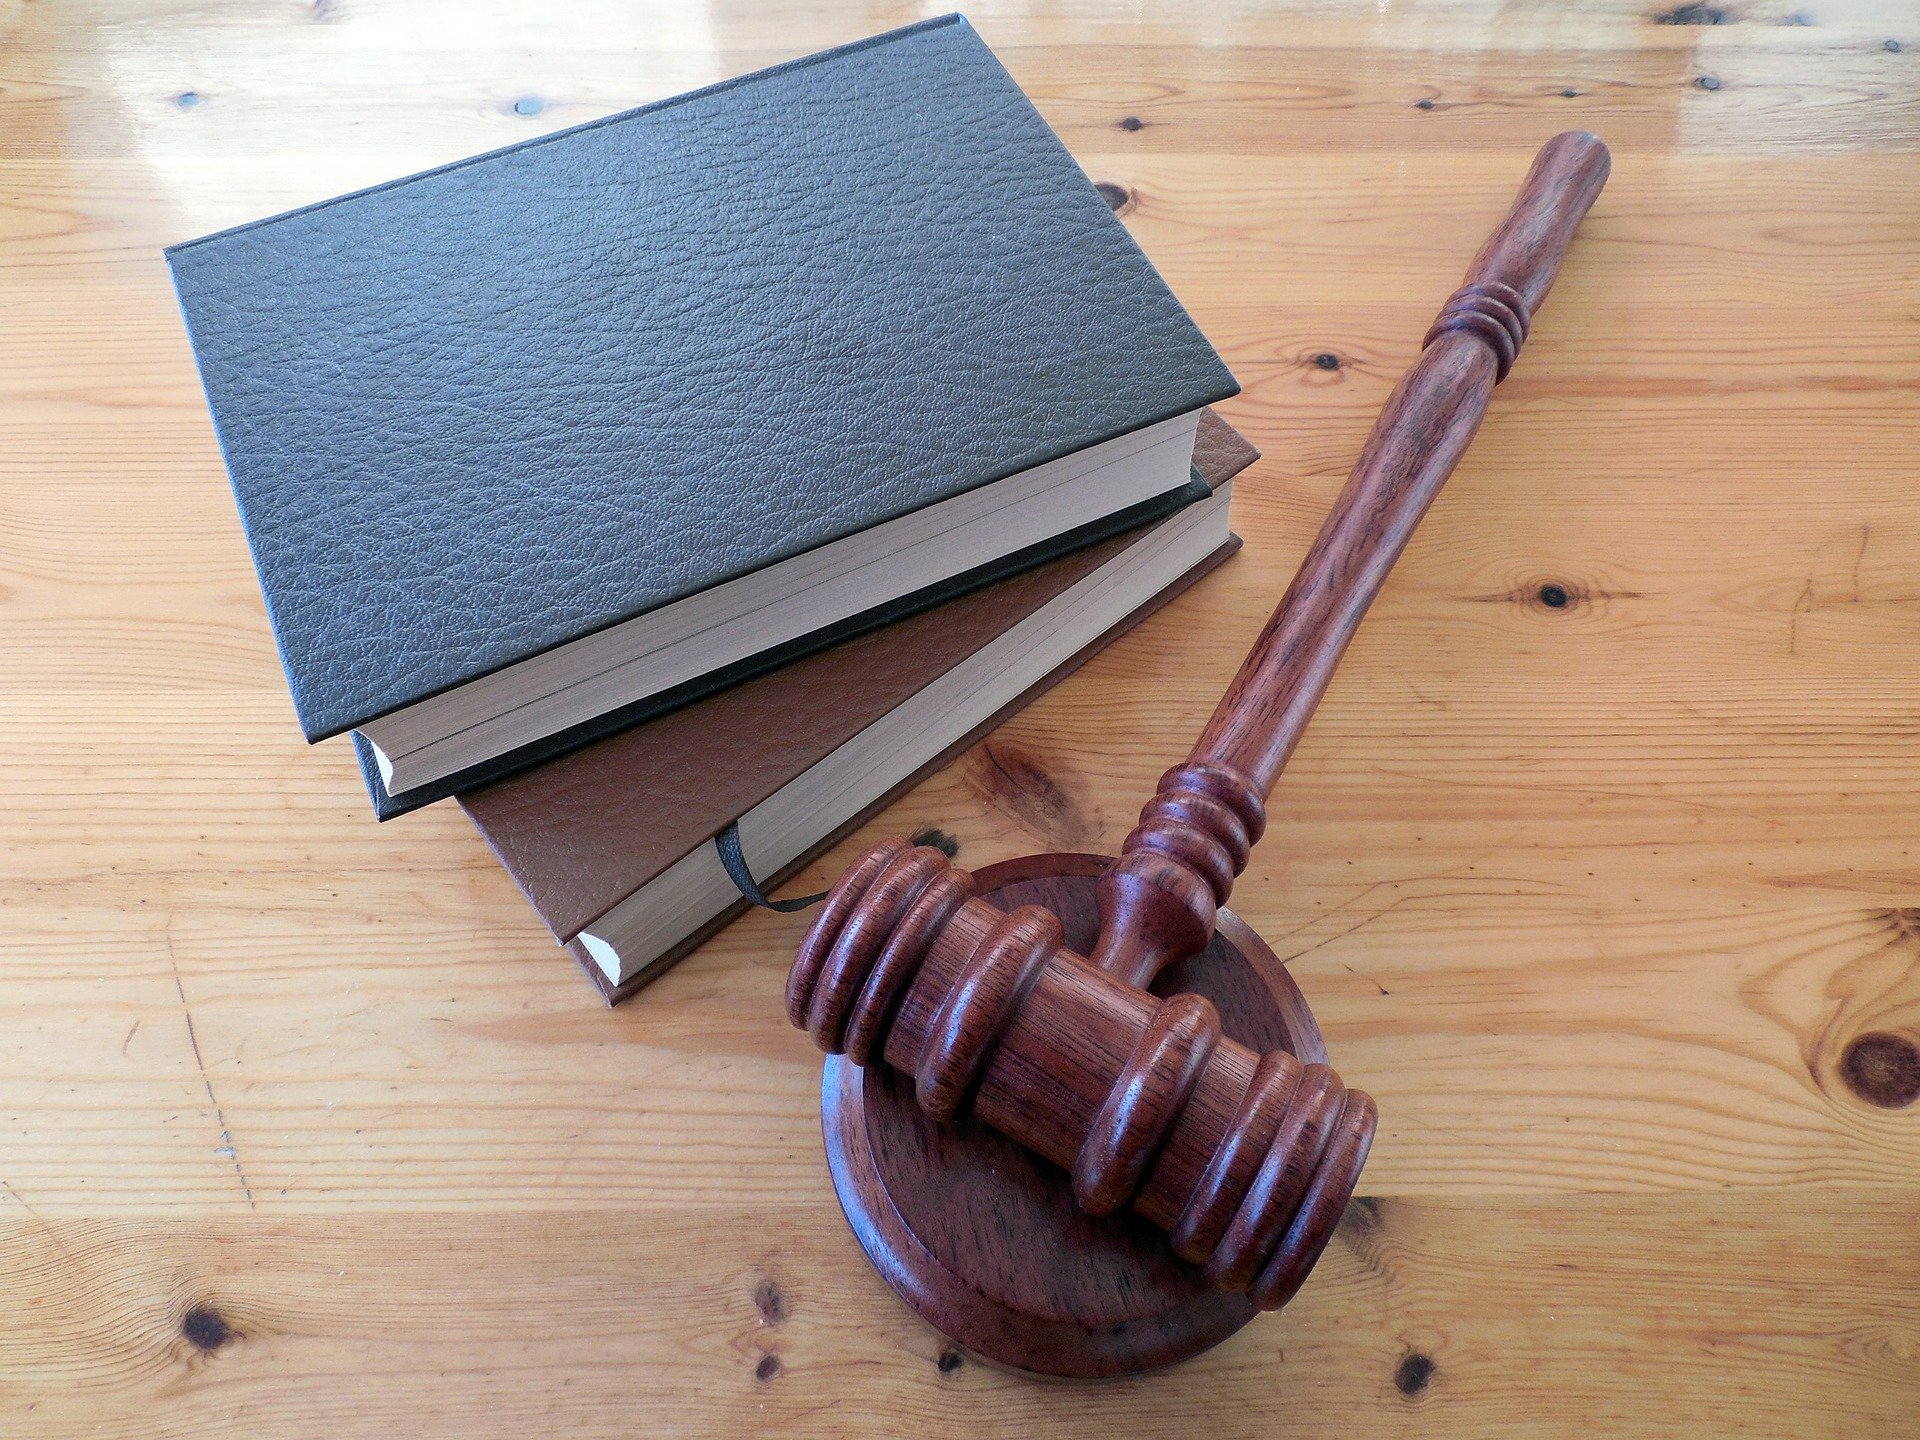 A wooden gavel rests on top of three stacked hardcover books on a wooden table, symbolizing legal concepts related to domestic violence.